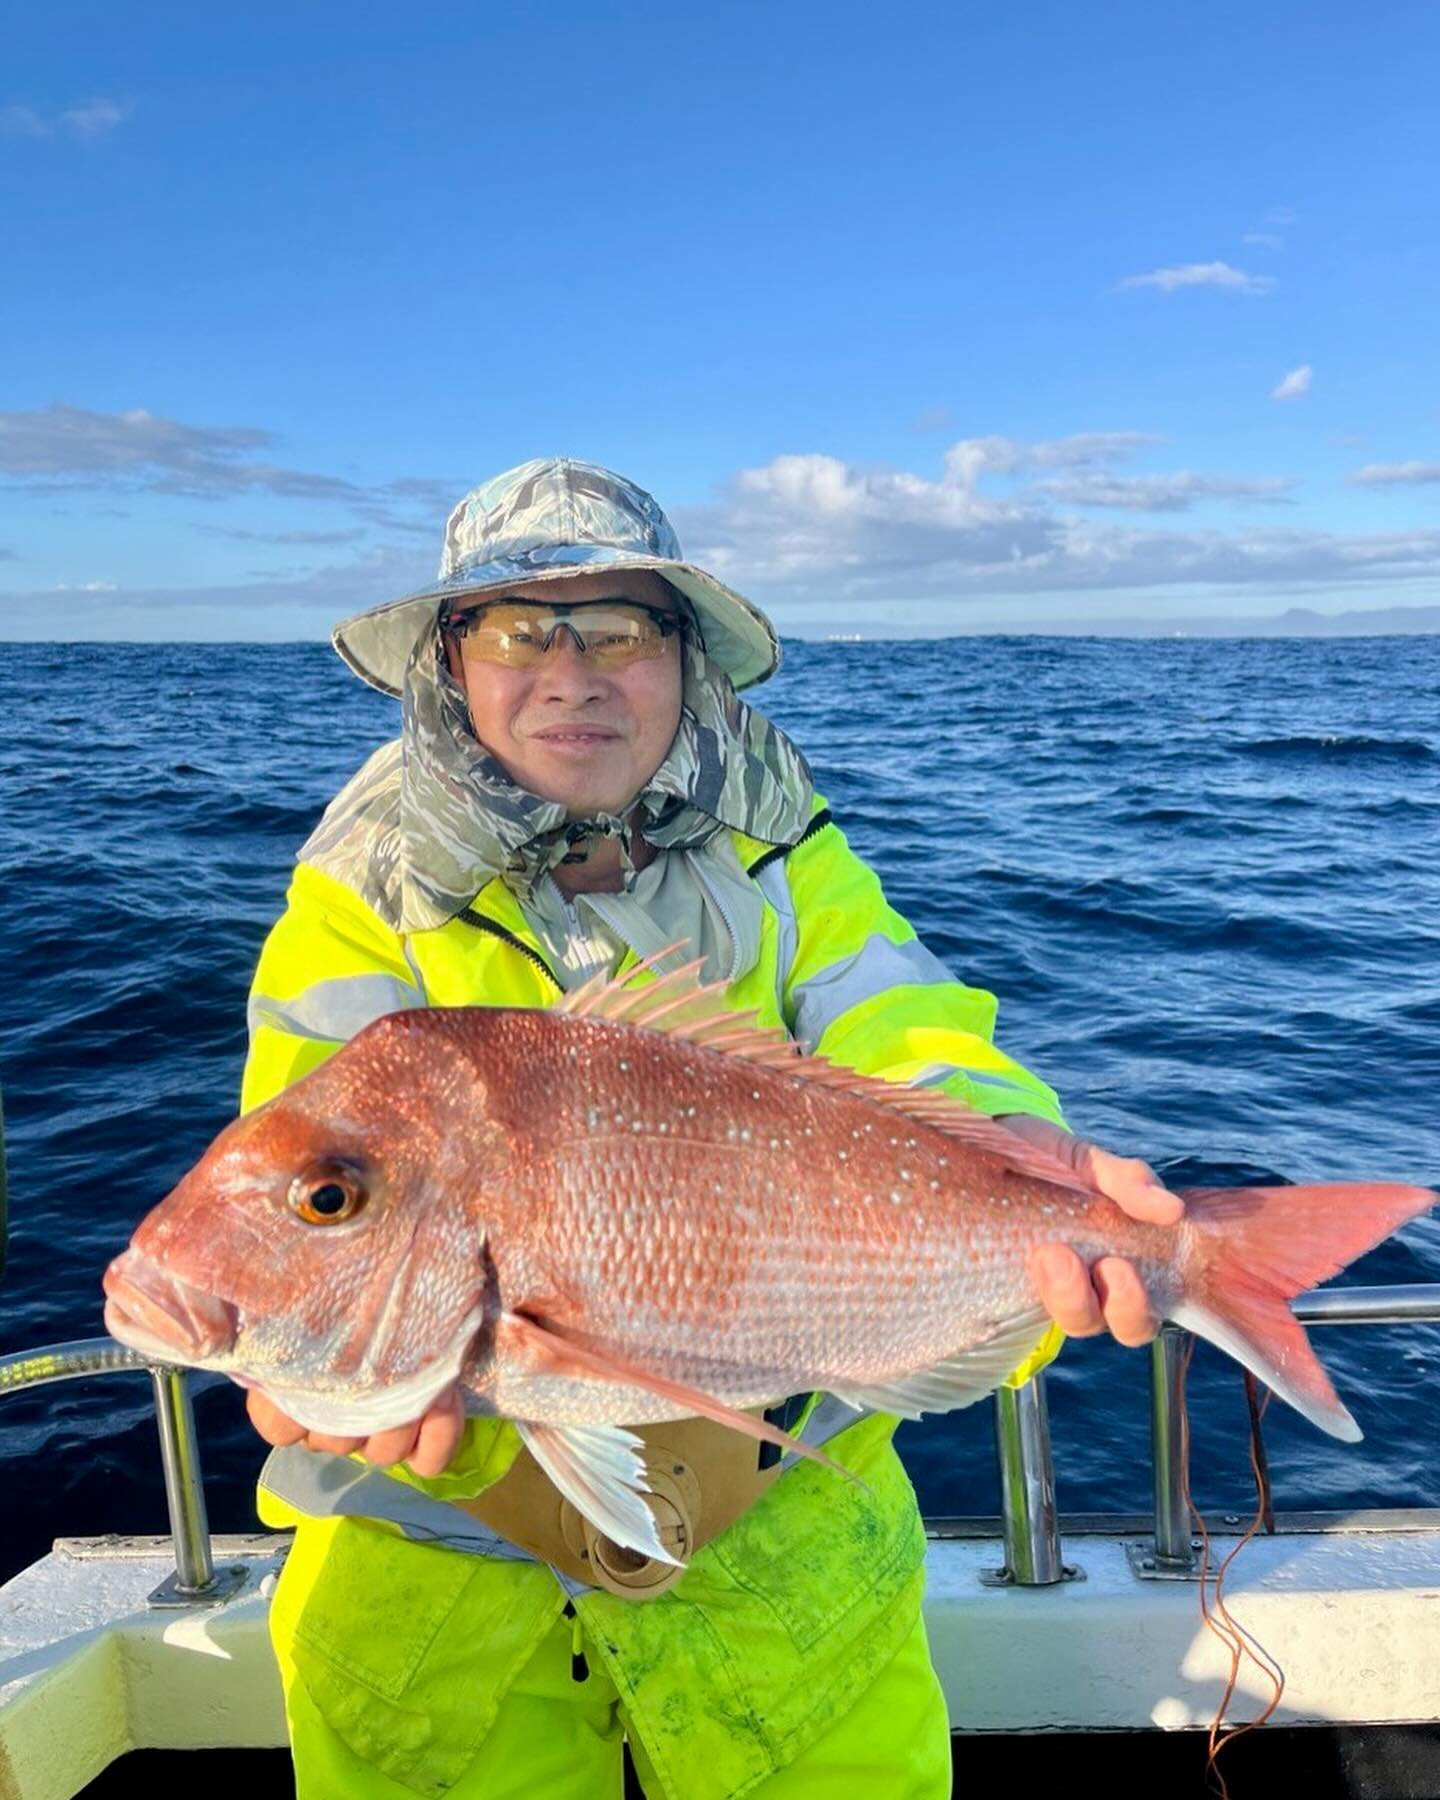 Monster snappers coming in hoottt 🔥🔥🔥 The boys from Fairfield Fishing Club absolutely nailed it with their bites on Sunday! Phew, what a workout! 💪